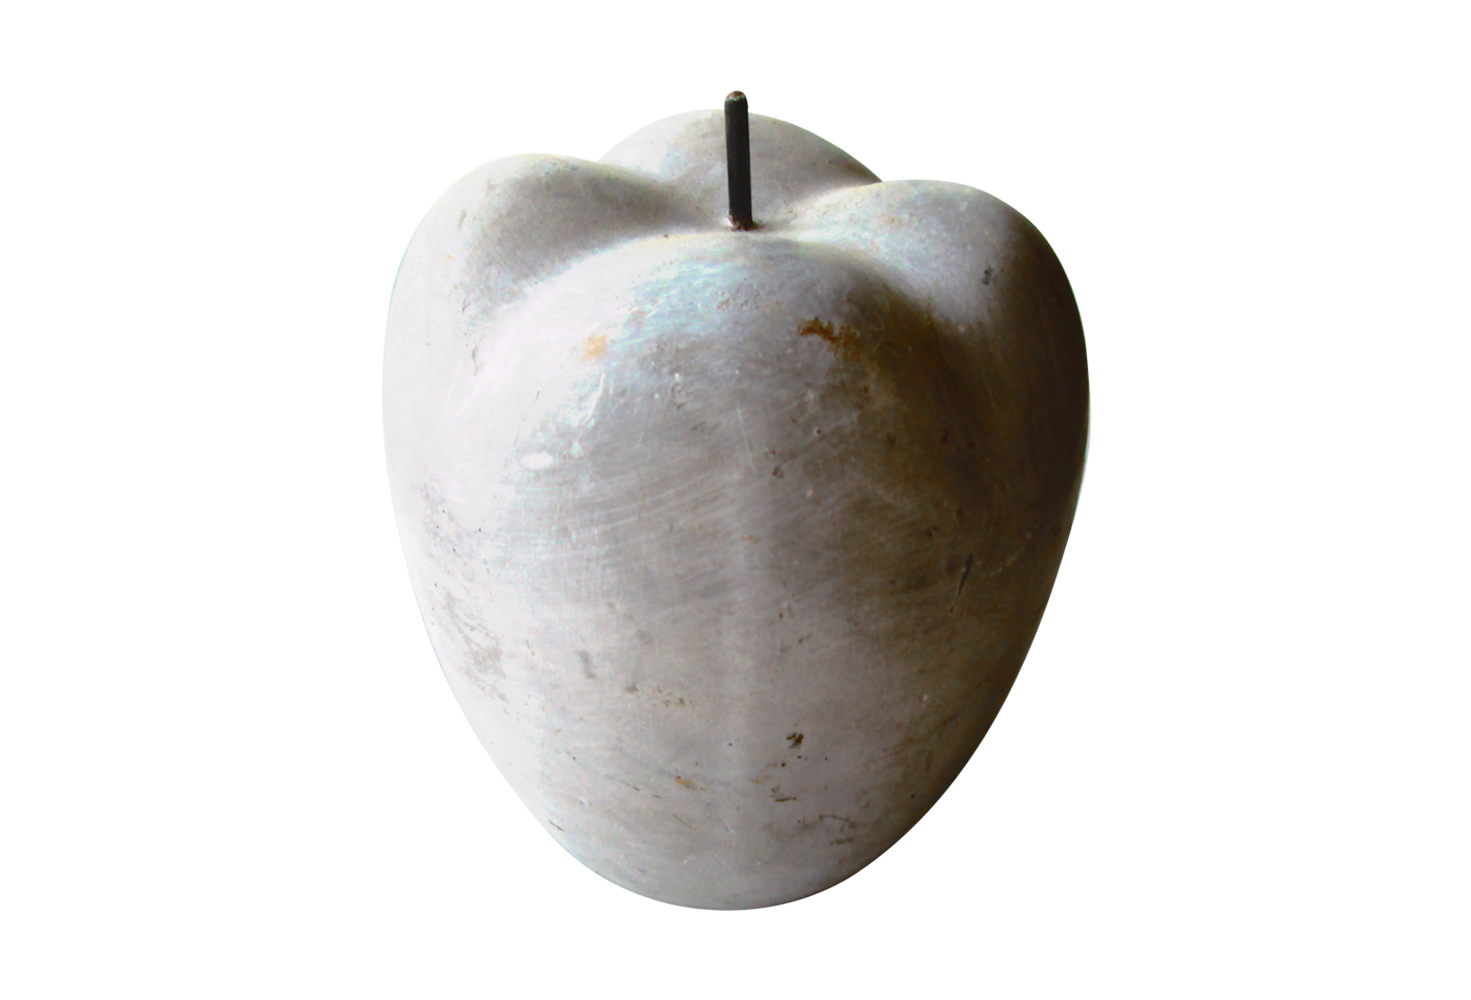 Abstract Representation of a Concrete Apple